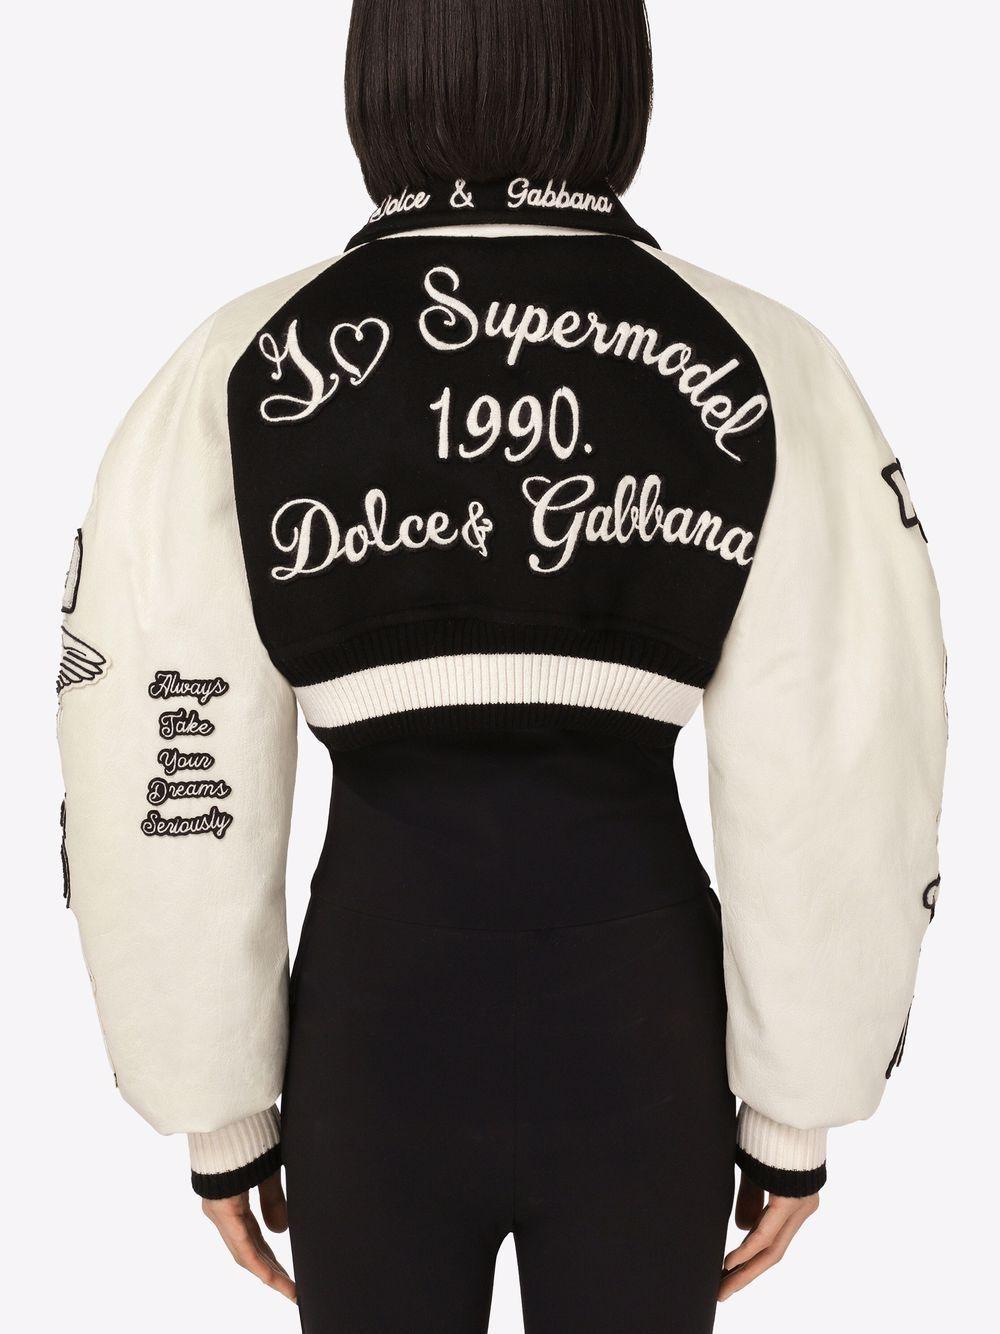 Dolce & Gabbana Cropped Bomber Jacket in Black | Lyst